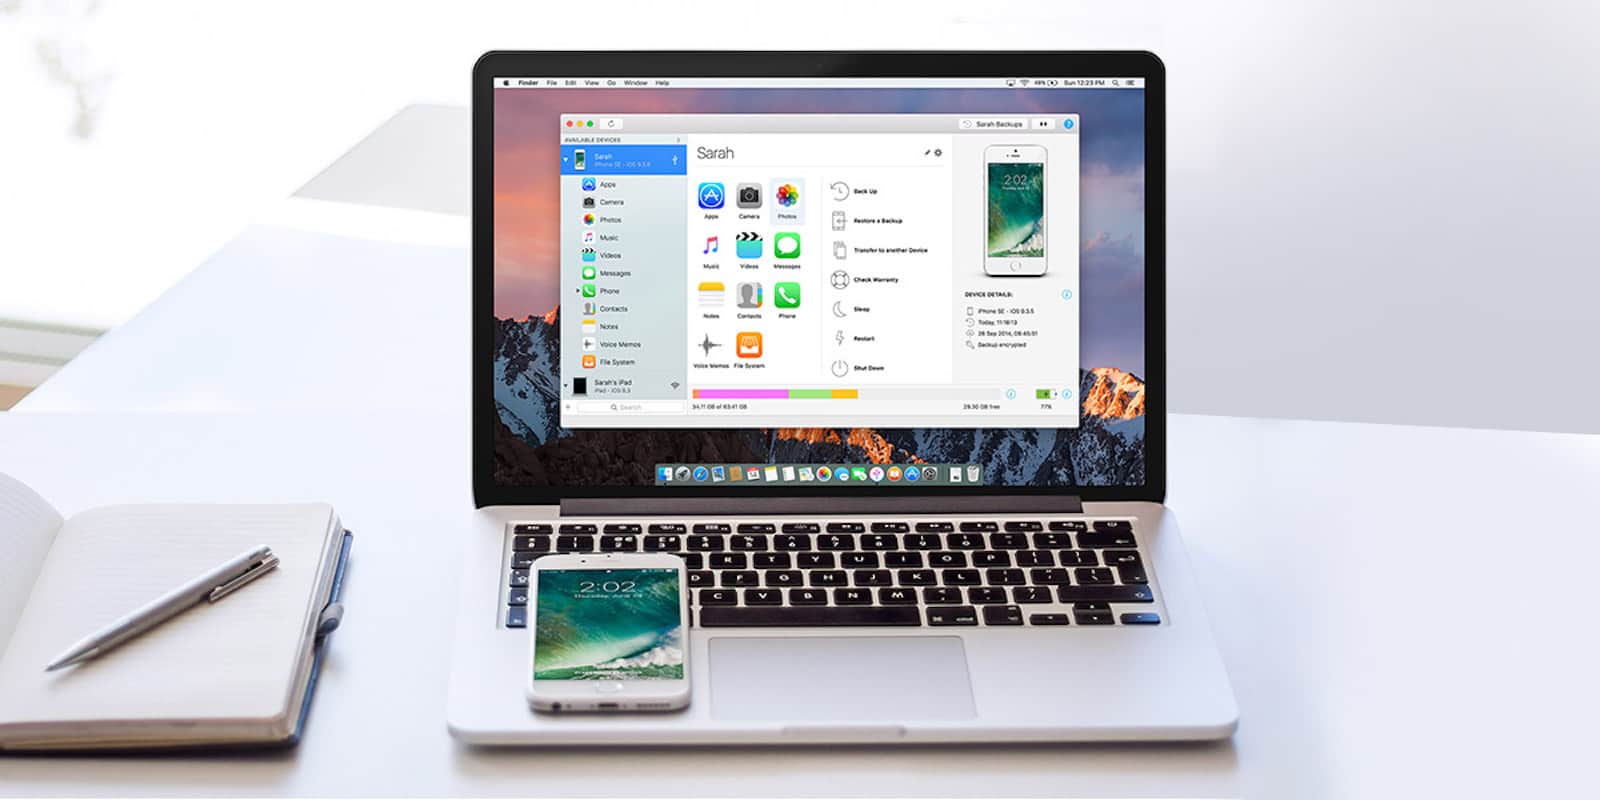 This popular app offers a range of tools that makes it much more versatile than iTunes for iOS management.